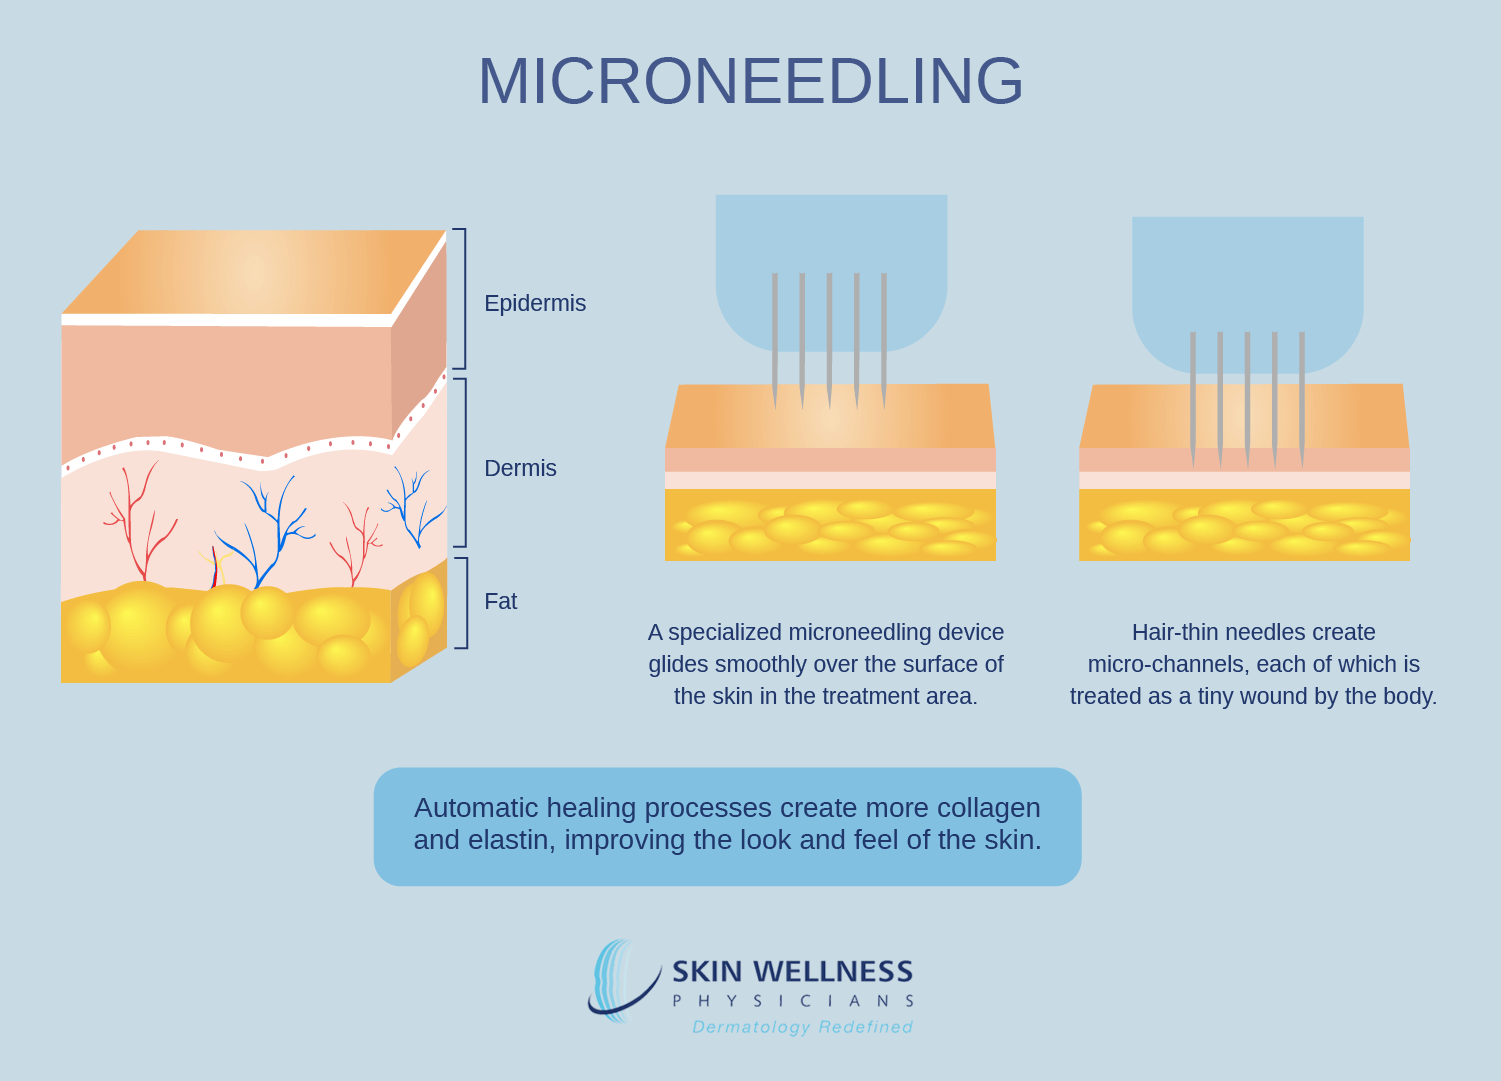 See how microneedling at Naples and Marco Island’s Skin Wellness Physicians works.